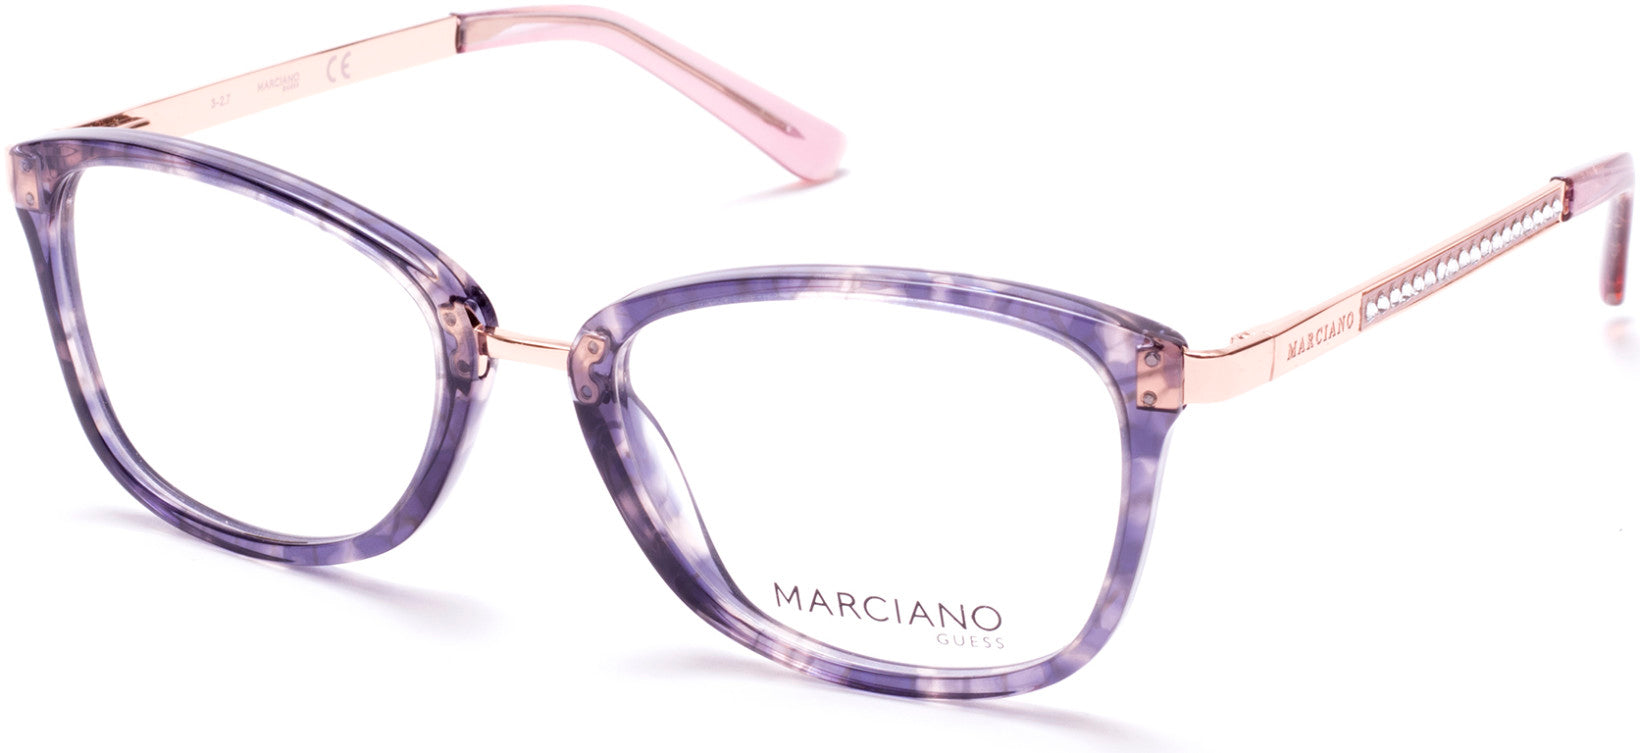 Guess By Marciano GM0325 Geometric Eyeglasses 083-083 - Violet